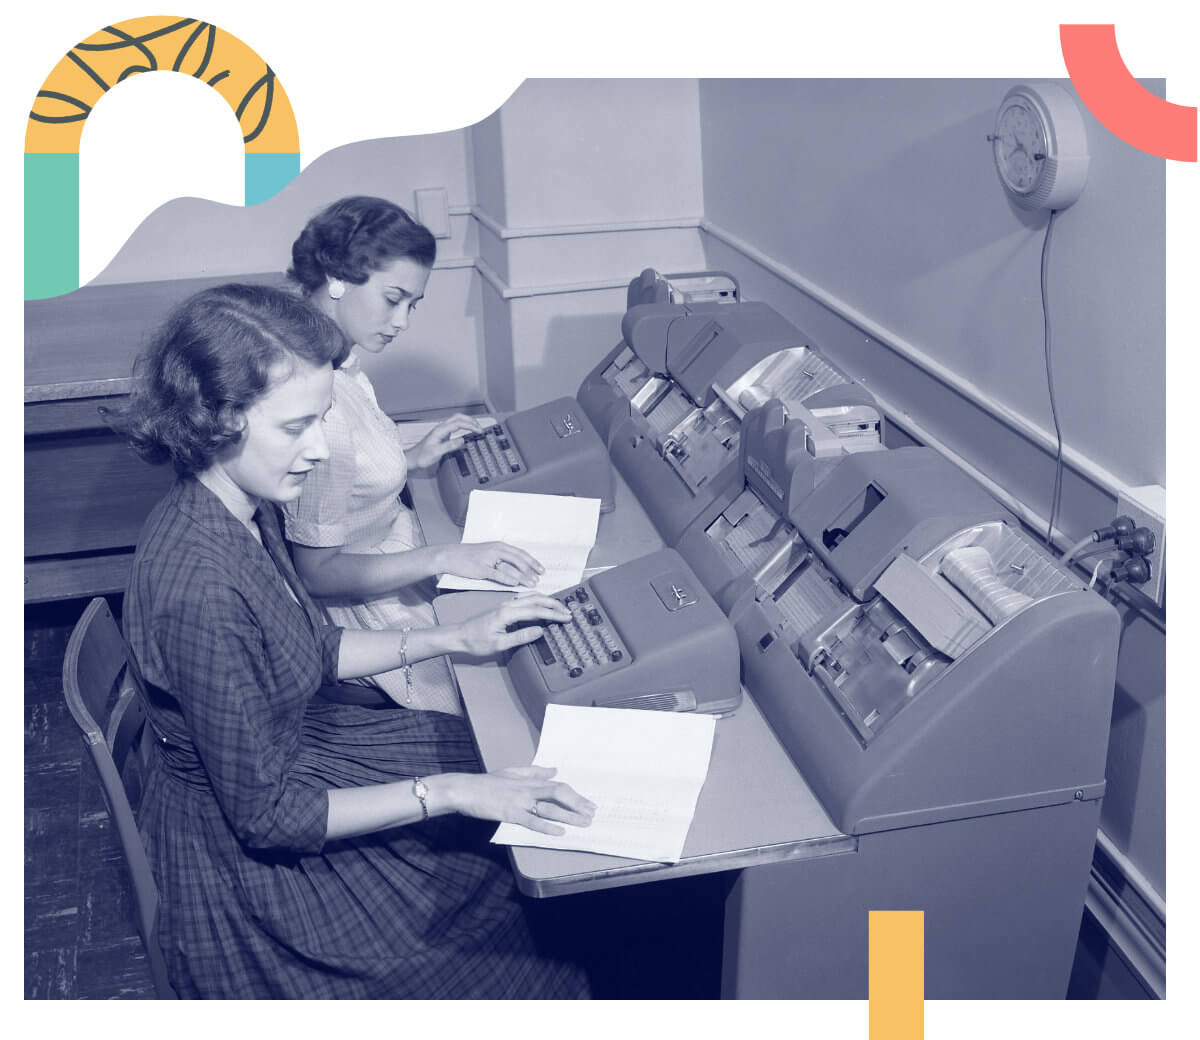 A vintage photos of two women working on large vintage computers